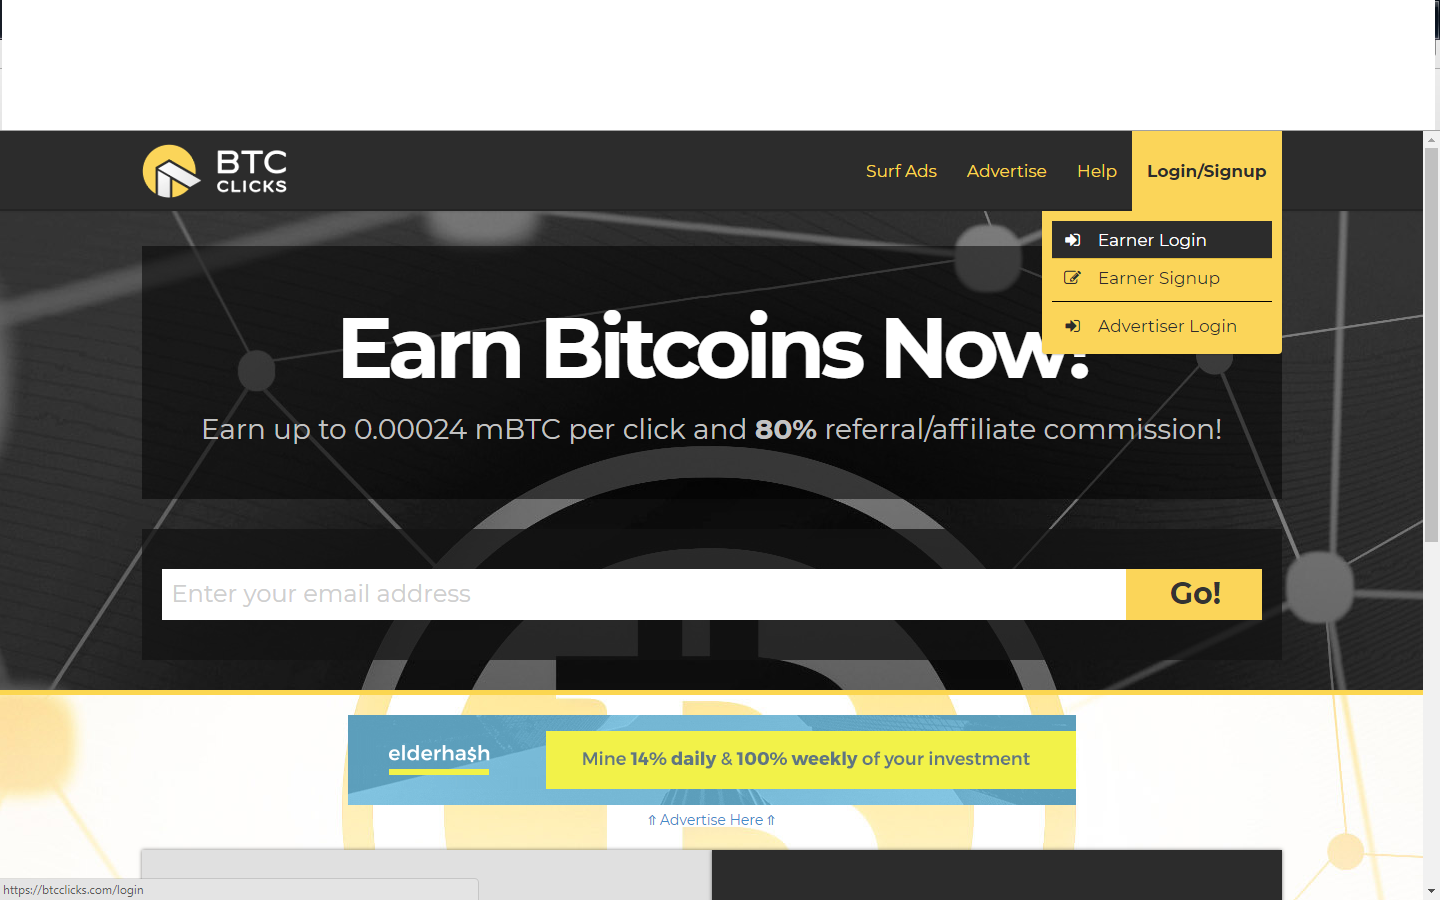 How To Earn Bitcoins Every Day By Watching Ads In Btc Clicks Steemit - 